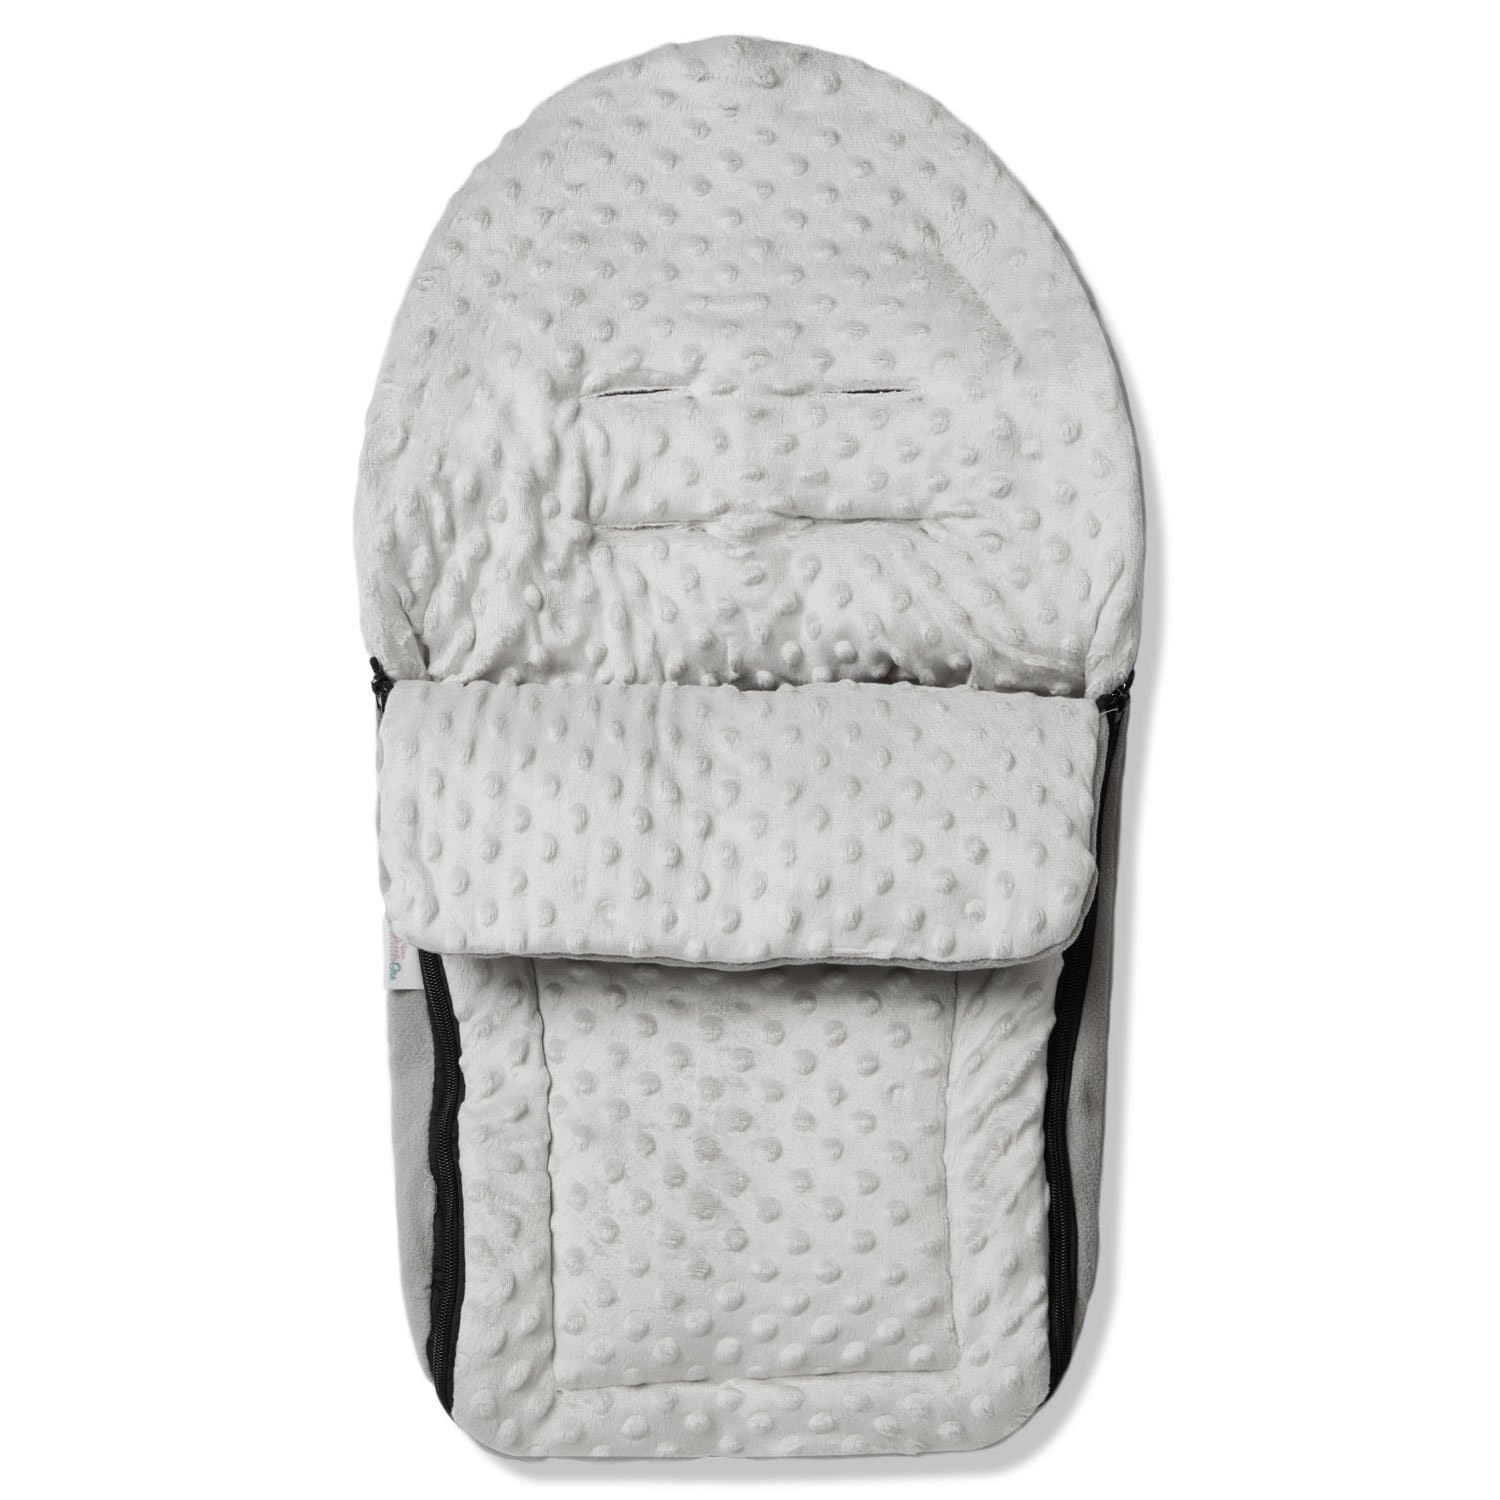 Dimple Car Seat Footmuff / Cosy Toes Compatible with Bebecar - For Your Little One